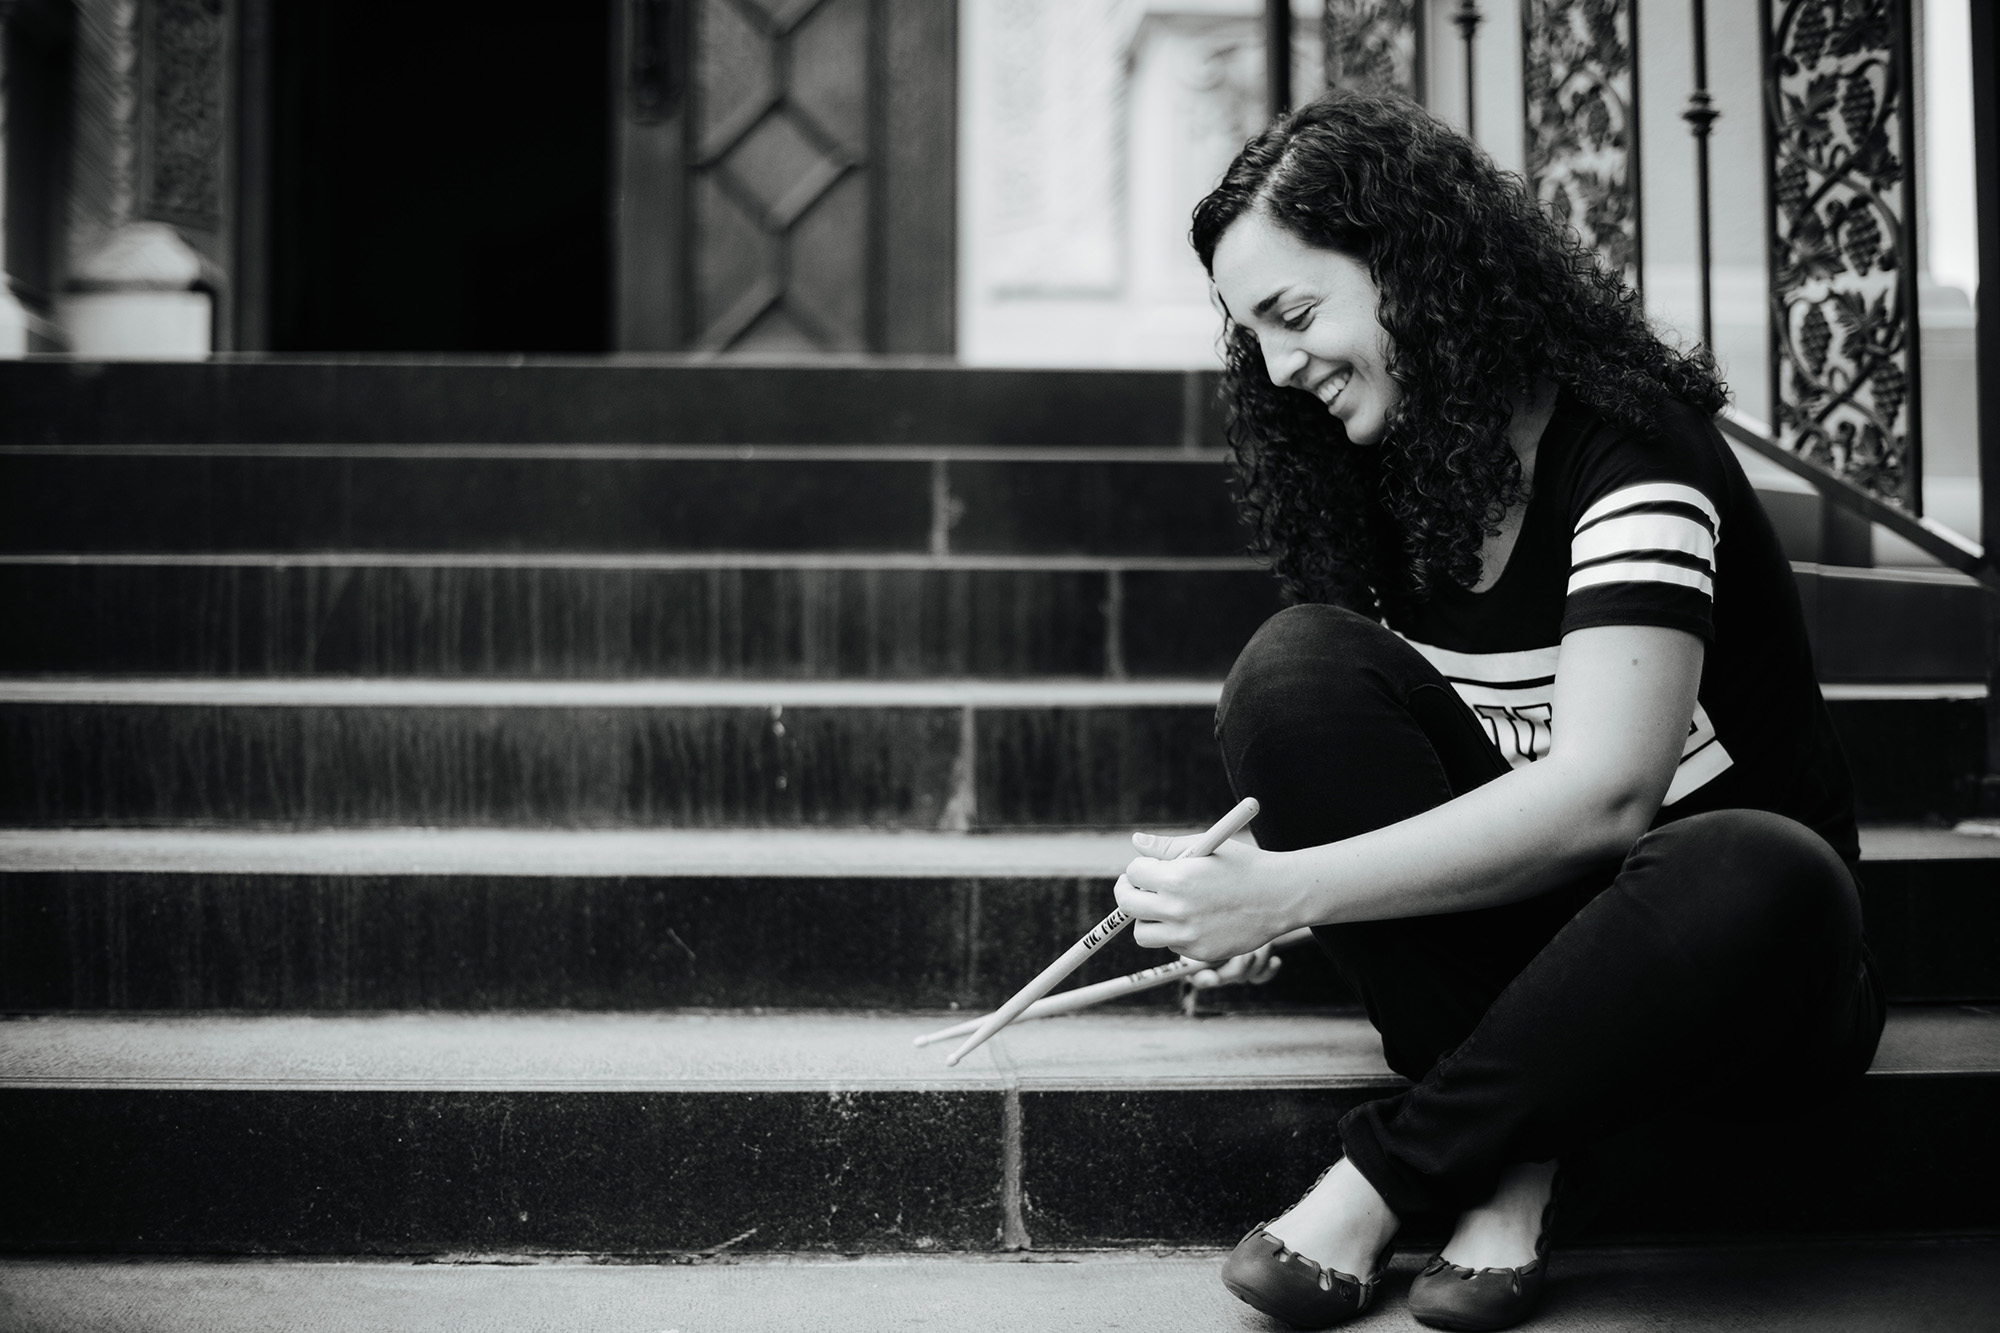 Ana Barreiro playing on a step with her drum sticks